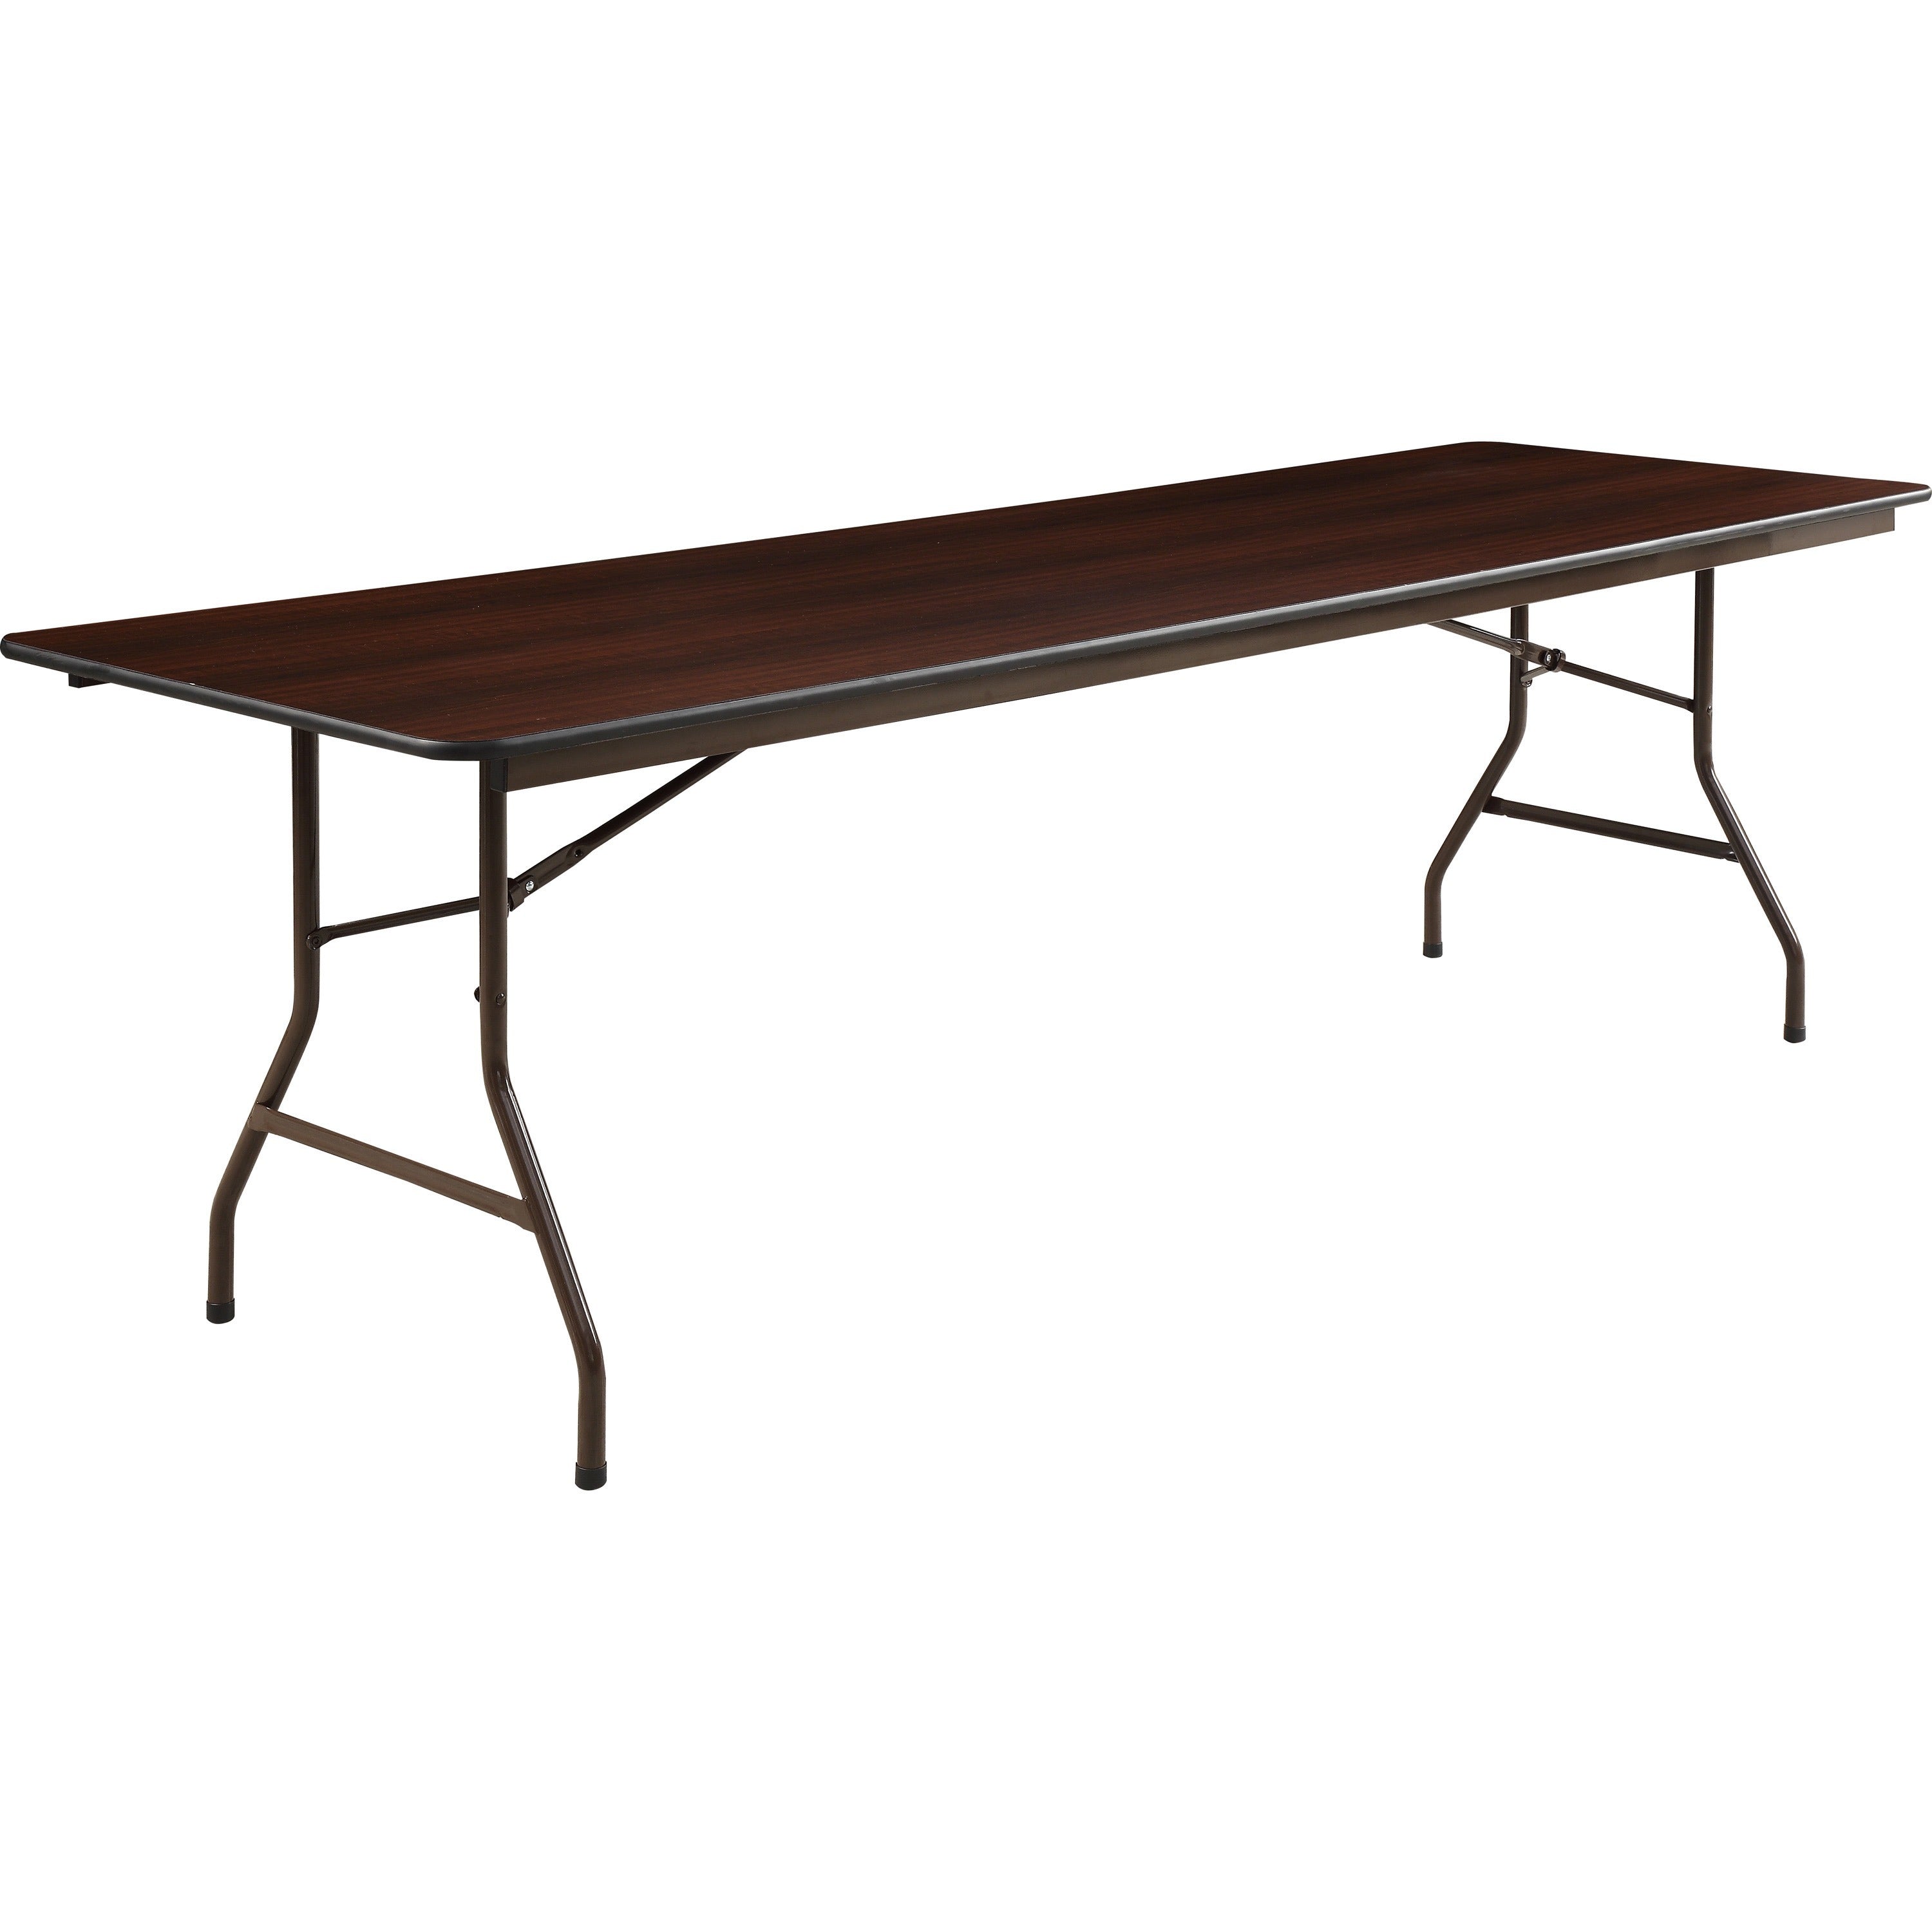 Lorell Economy Folding Table - For - Table TopMelamine Rectangle Top - 500 lb Capacity - 96" Table Top Length x 30" Table Top Width x 0.63" Table Top Thickness - 29" Height - Mahogany - 1 Each - 